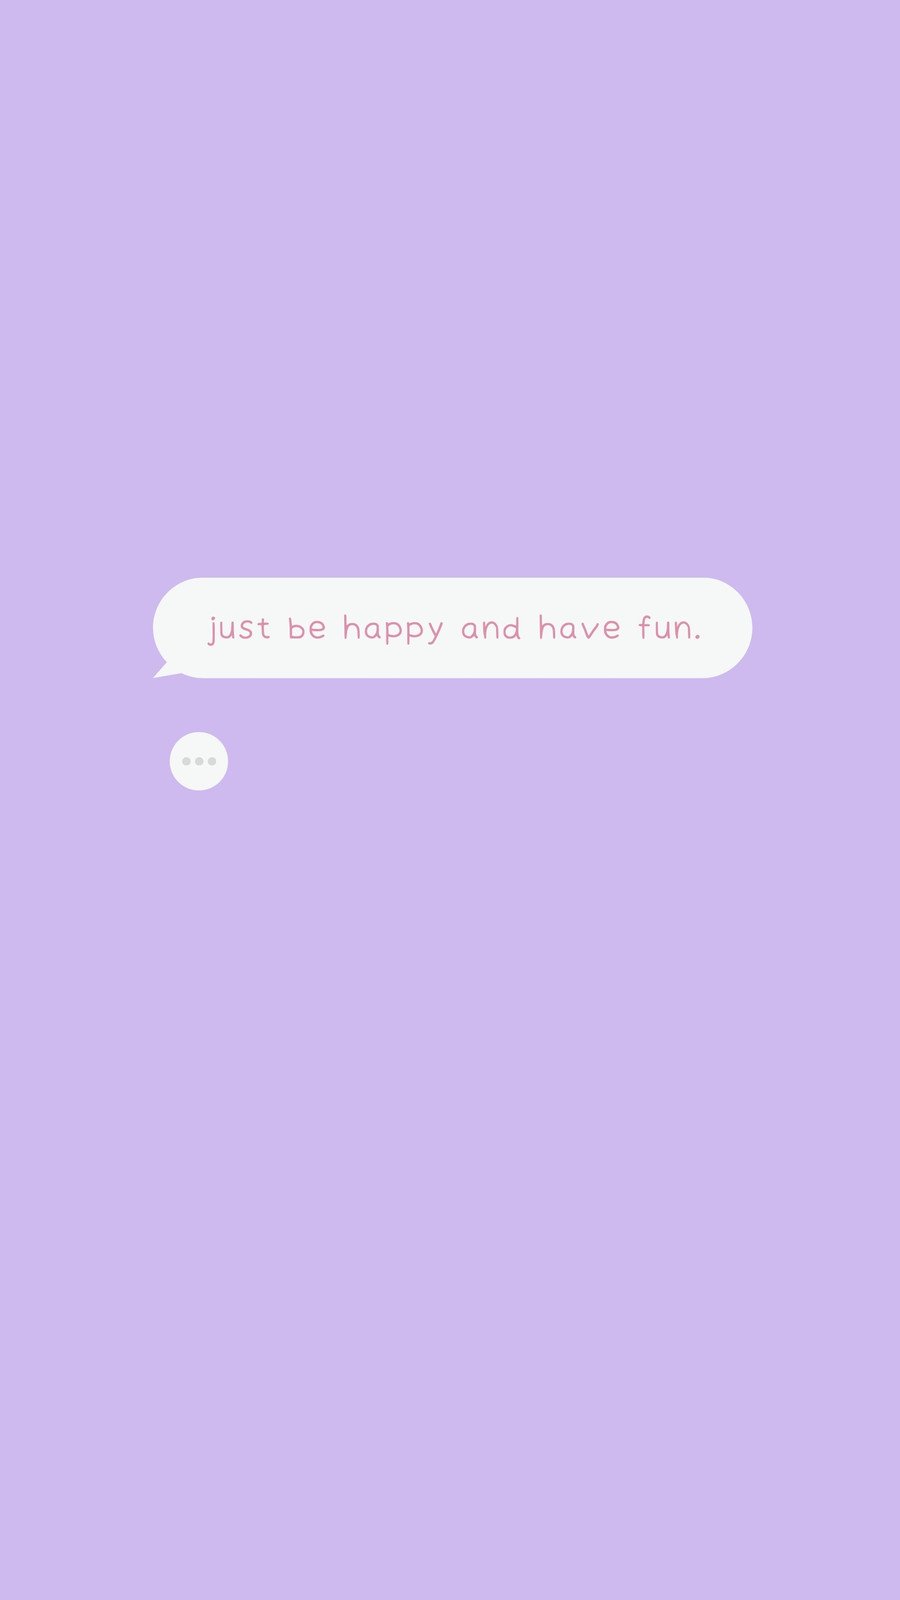 Aesthetic Quotes Happy. quotes, Message, Quotes, HD phone wallpaper